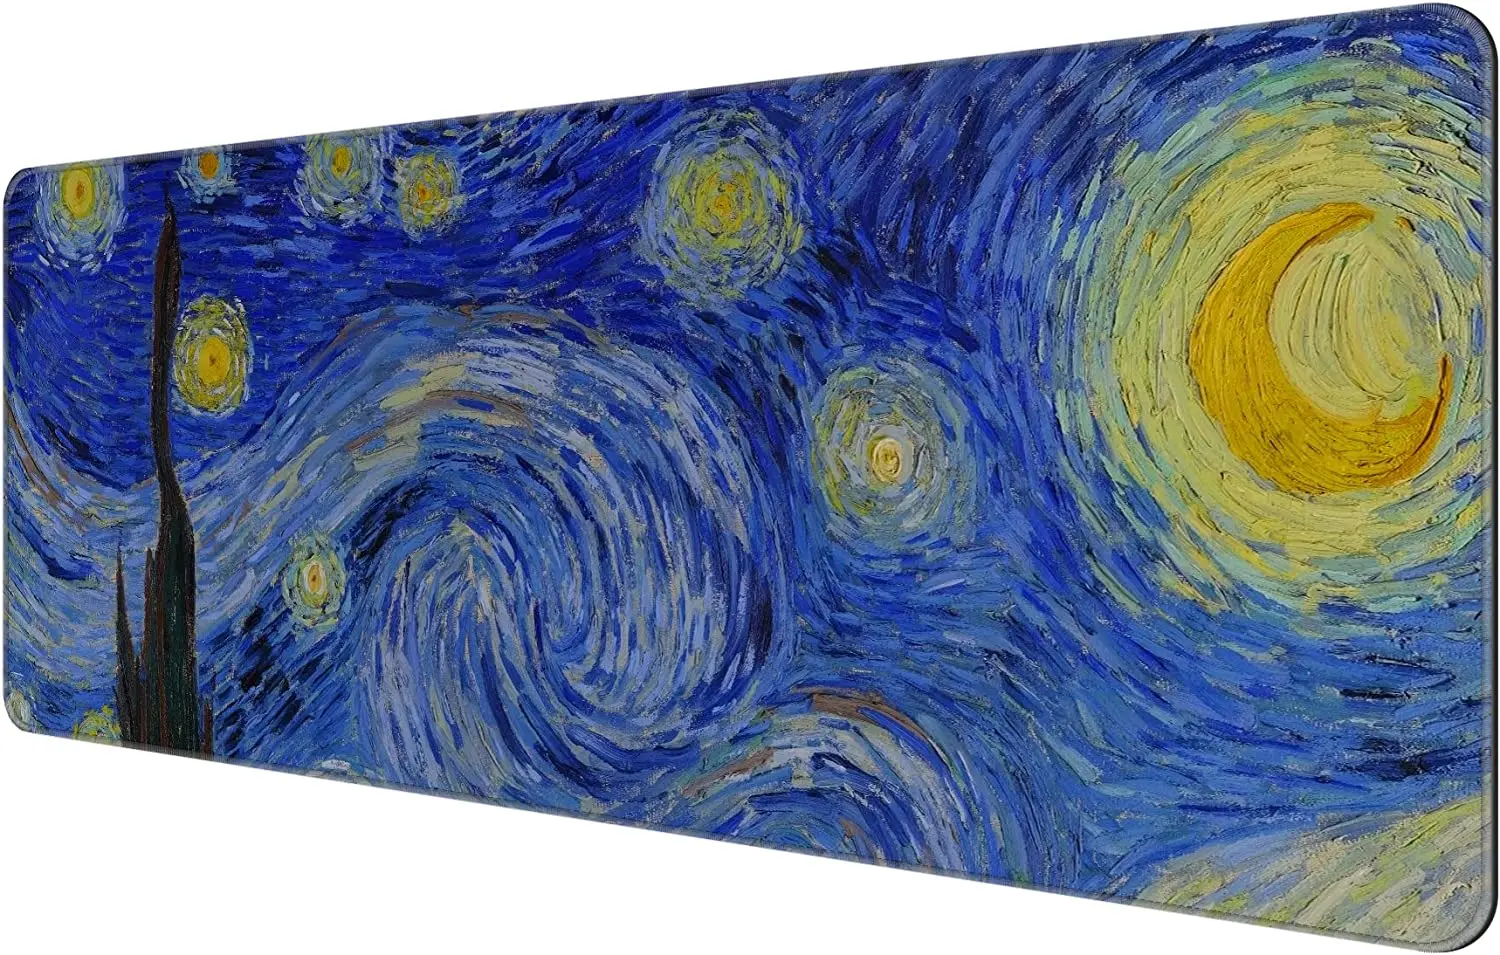 

Thin Extended Gaming Mouse Pad 31.5*11.8*0.12 inch with Stitched Edges Large Mousepad Long XXL Keyboard - The Starry Night